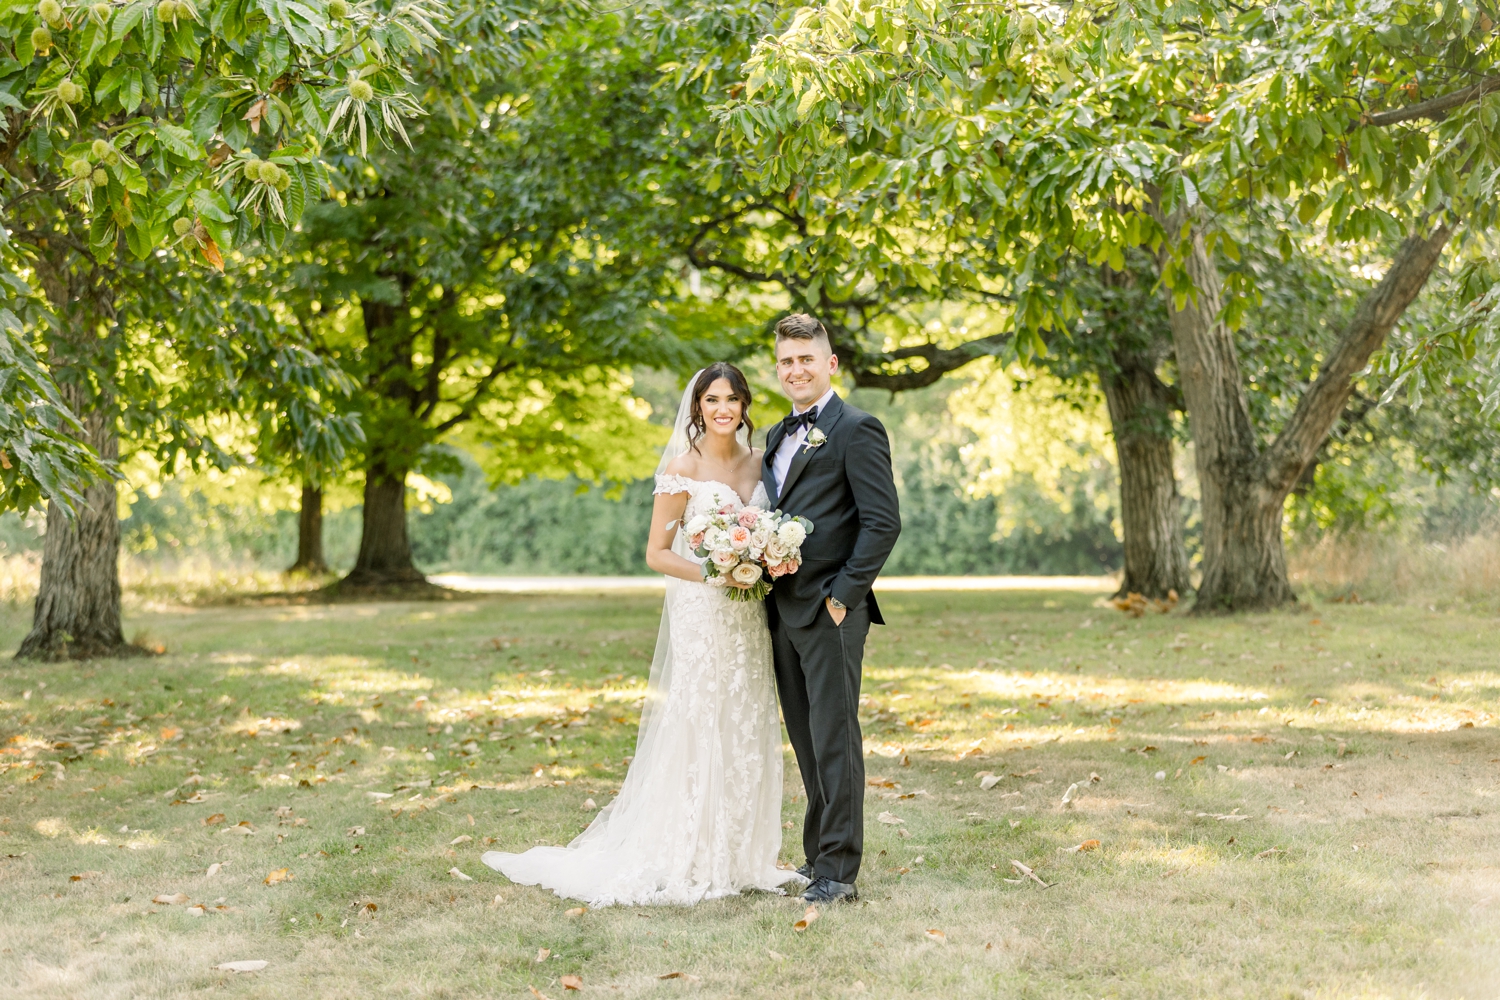 Bride and Groom in Pinecroft at Crosley Estate Orchard